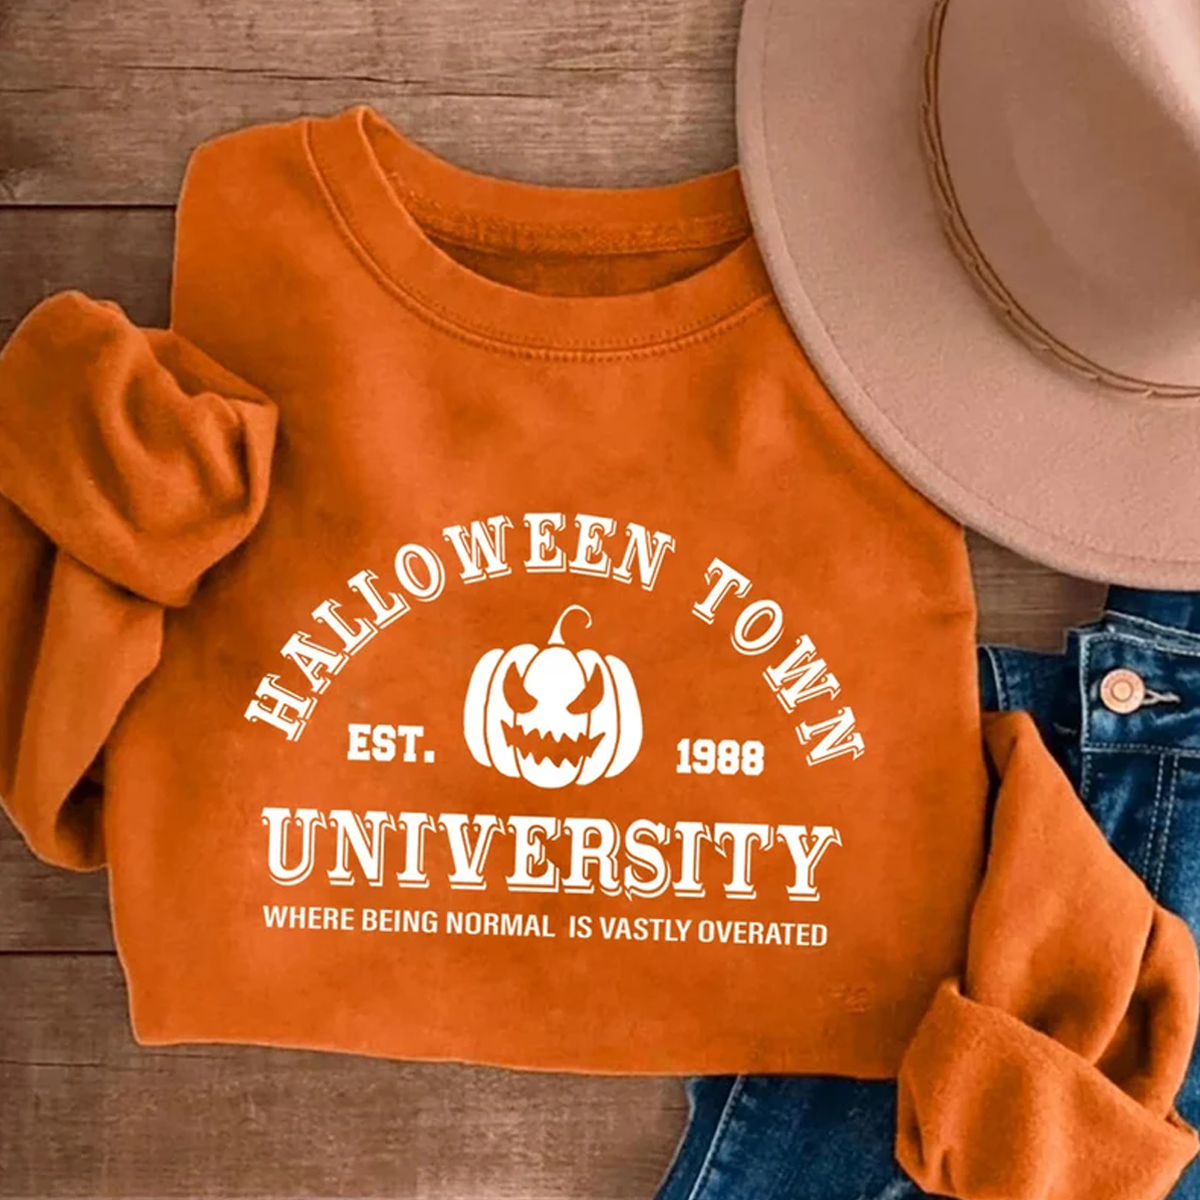 Halloween Town est 1988 Sweatshirt - where being normal is vastly overated